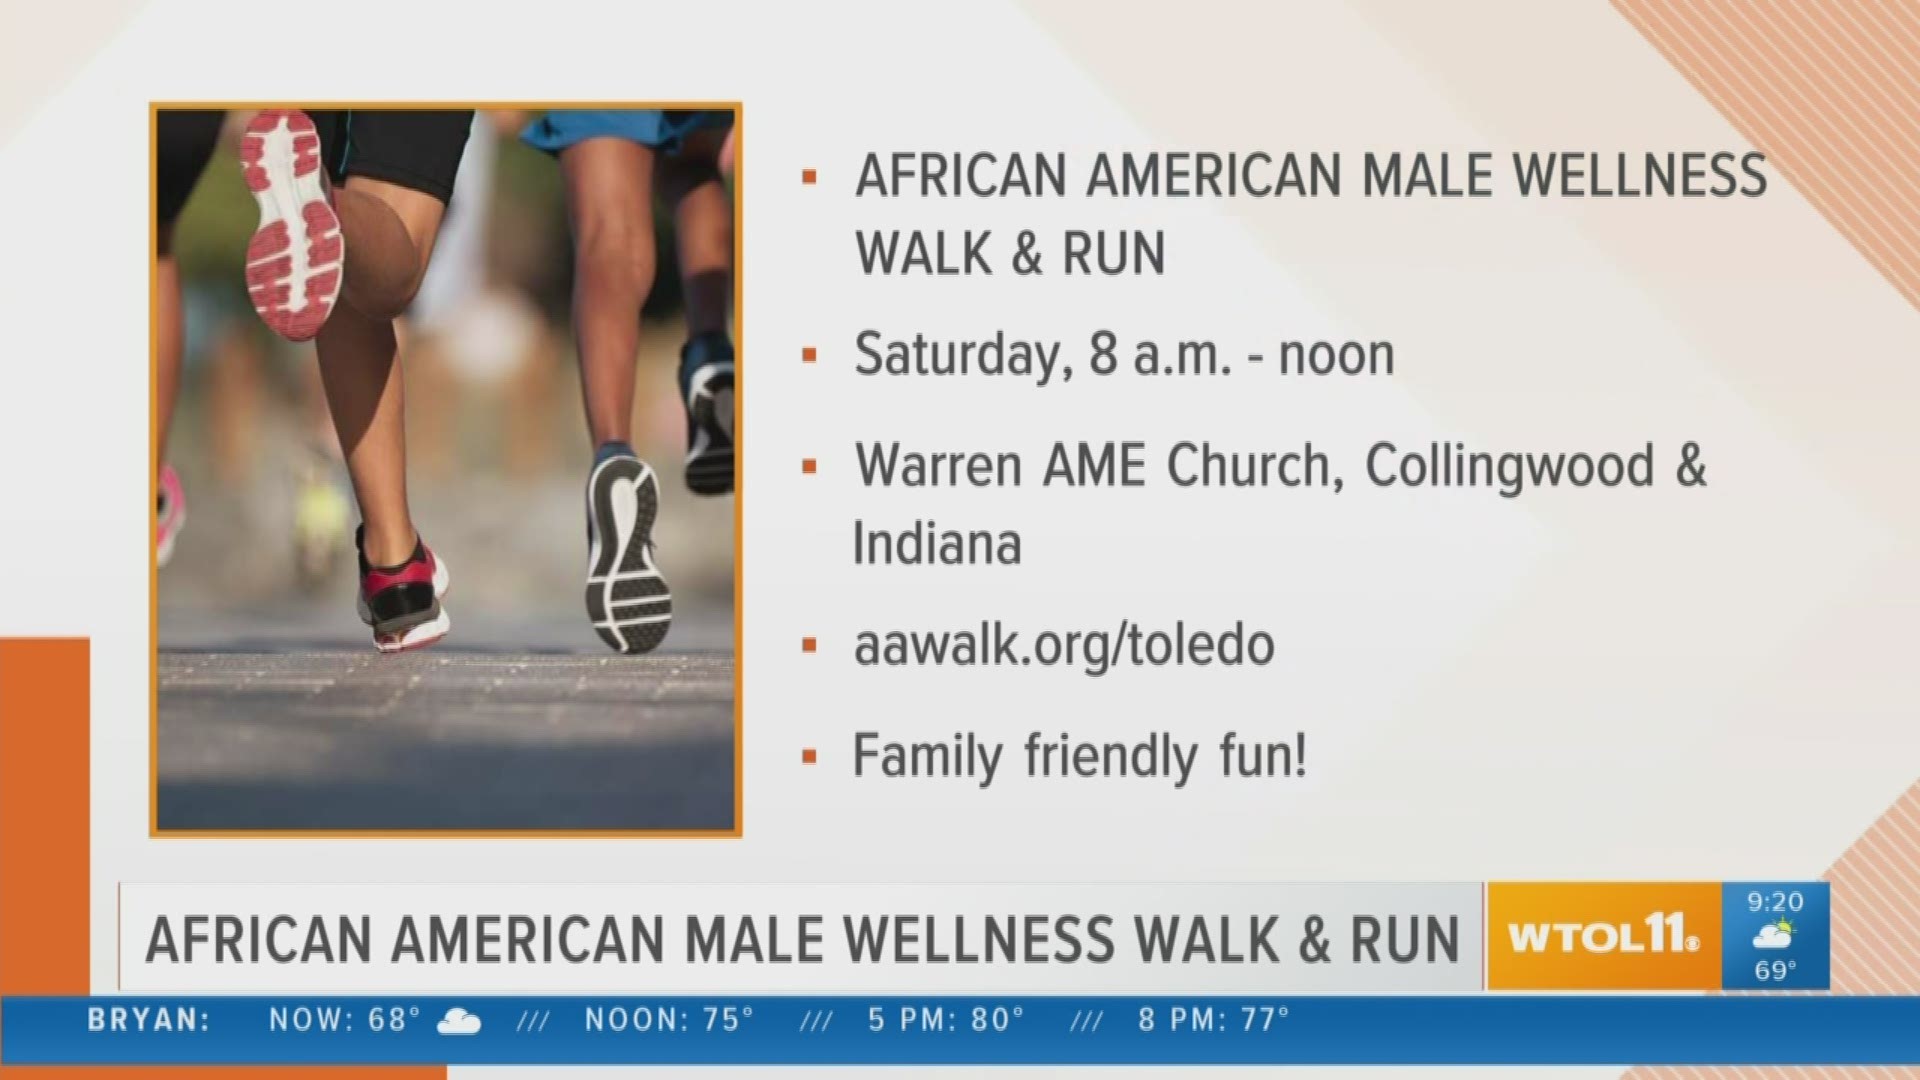 August is African American Male Wellness Month, and you can celebrate with a walk/run this Saturday!